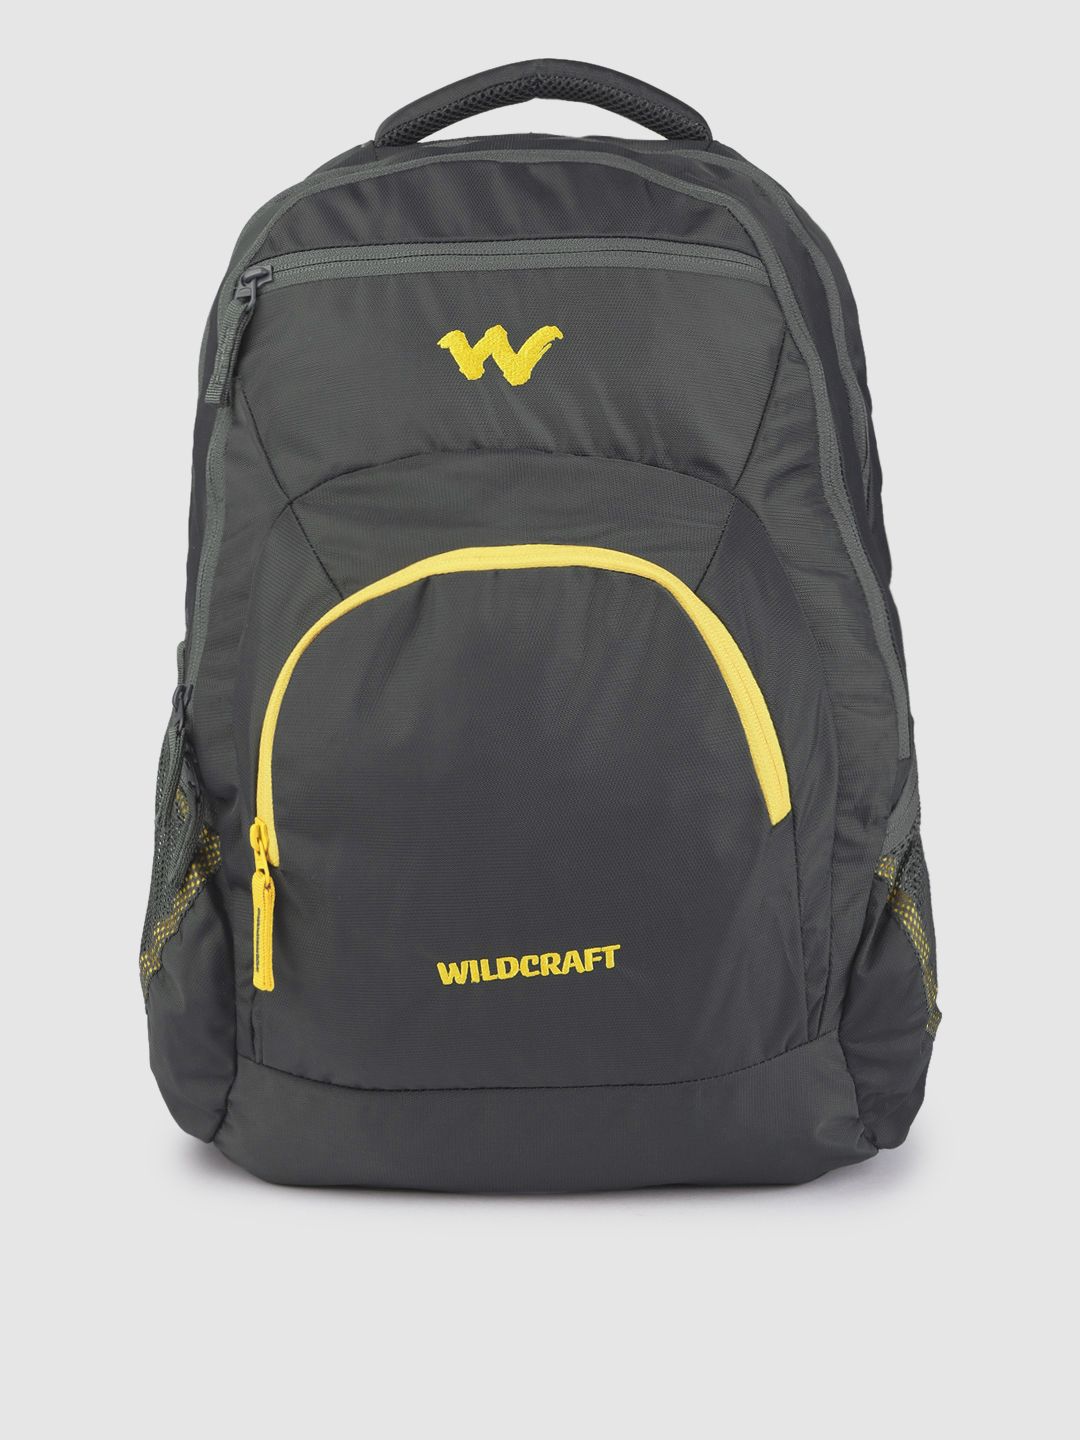 Wildcraft Unisex Grey Solid Backpack Price in India